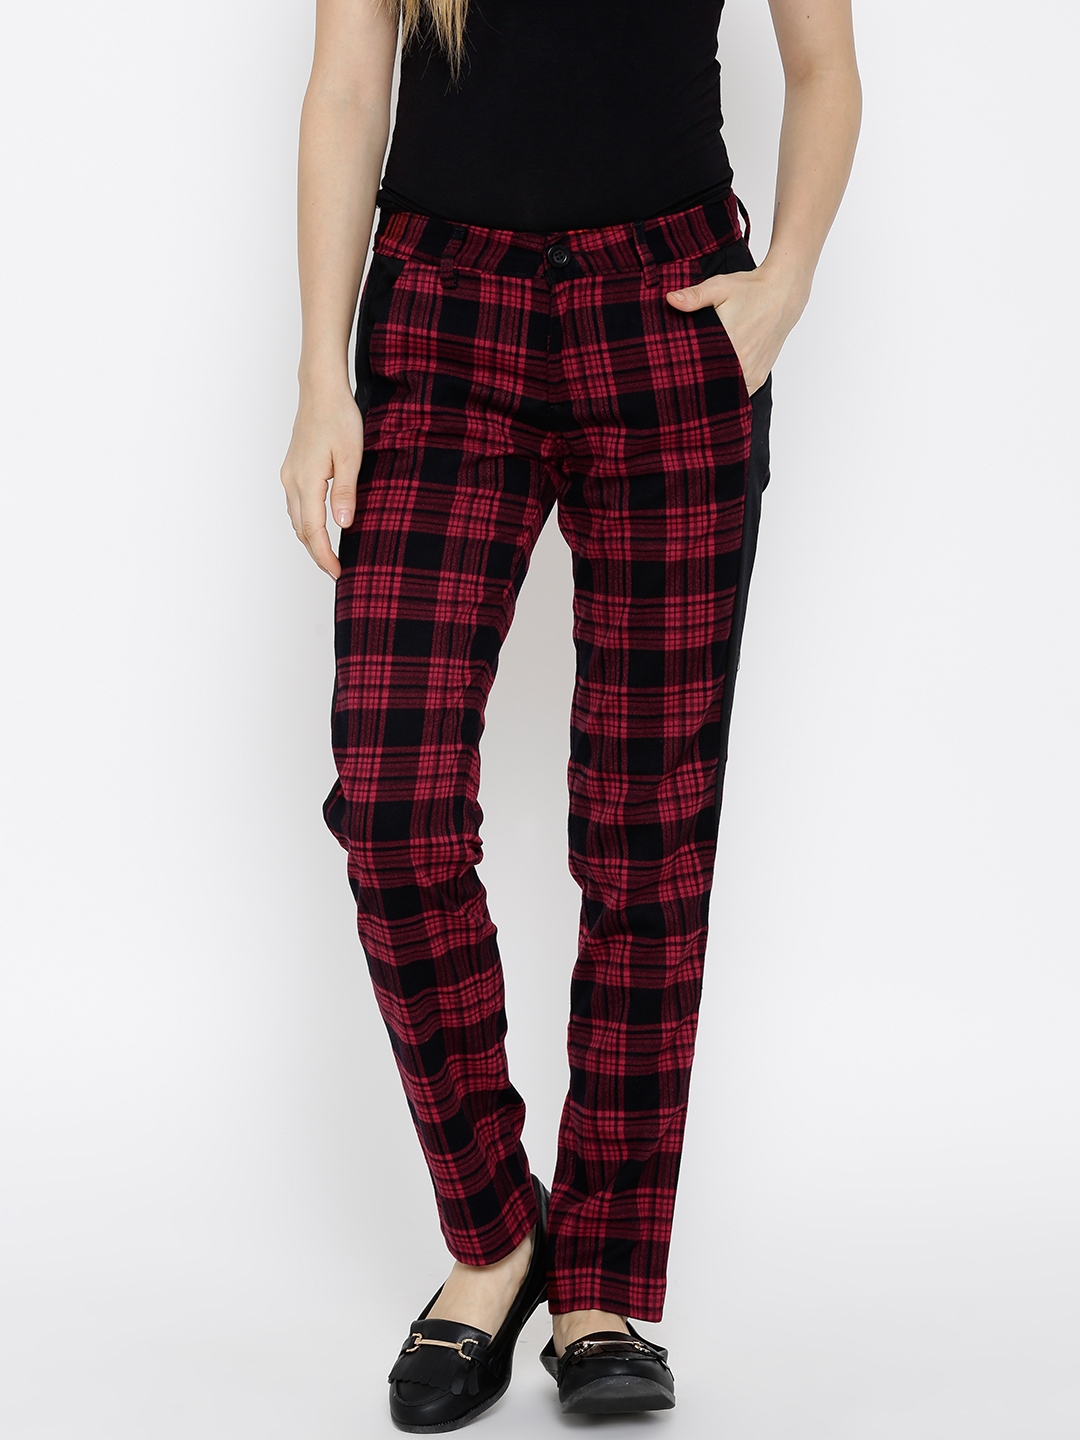 Buy MANGO Women Black  Red Checked Cropped Trousers  Trousers for Women  7098492  Myntra